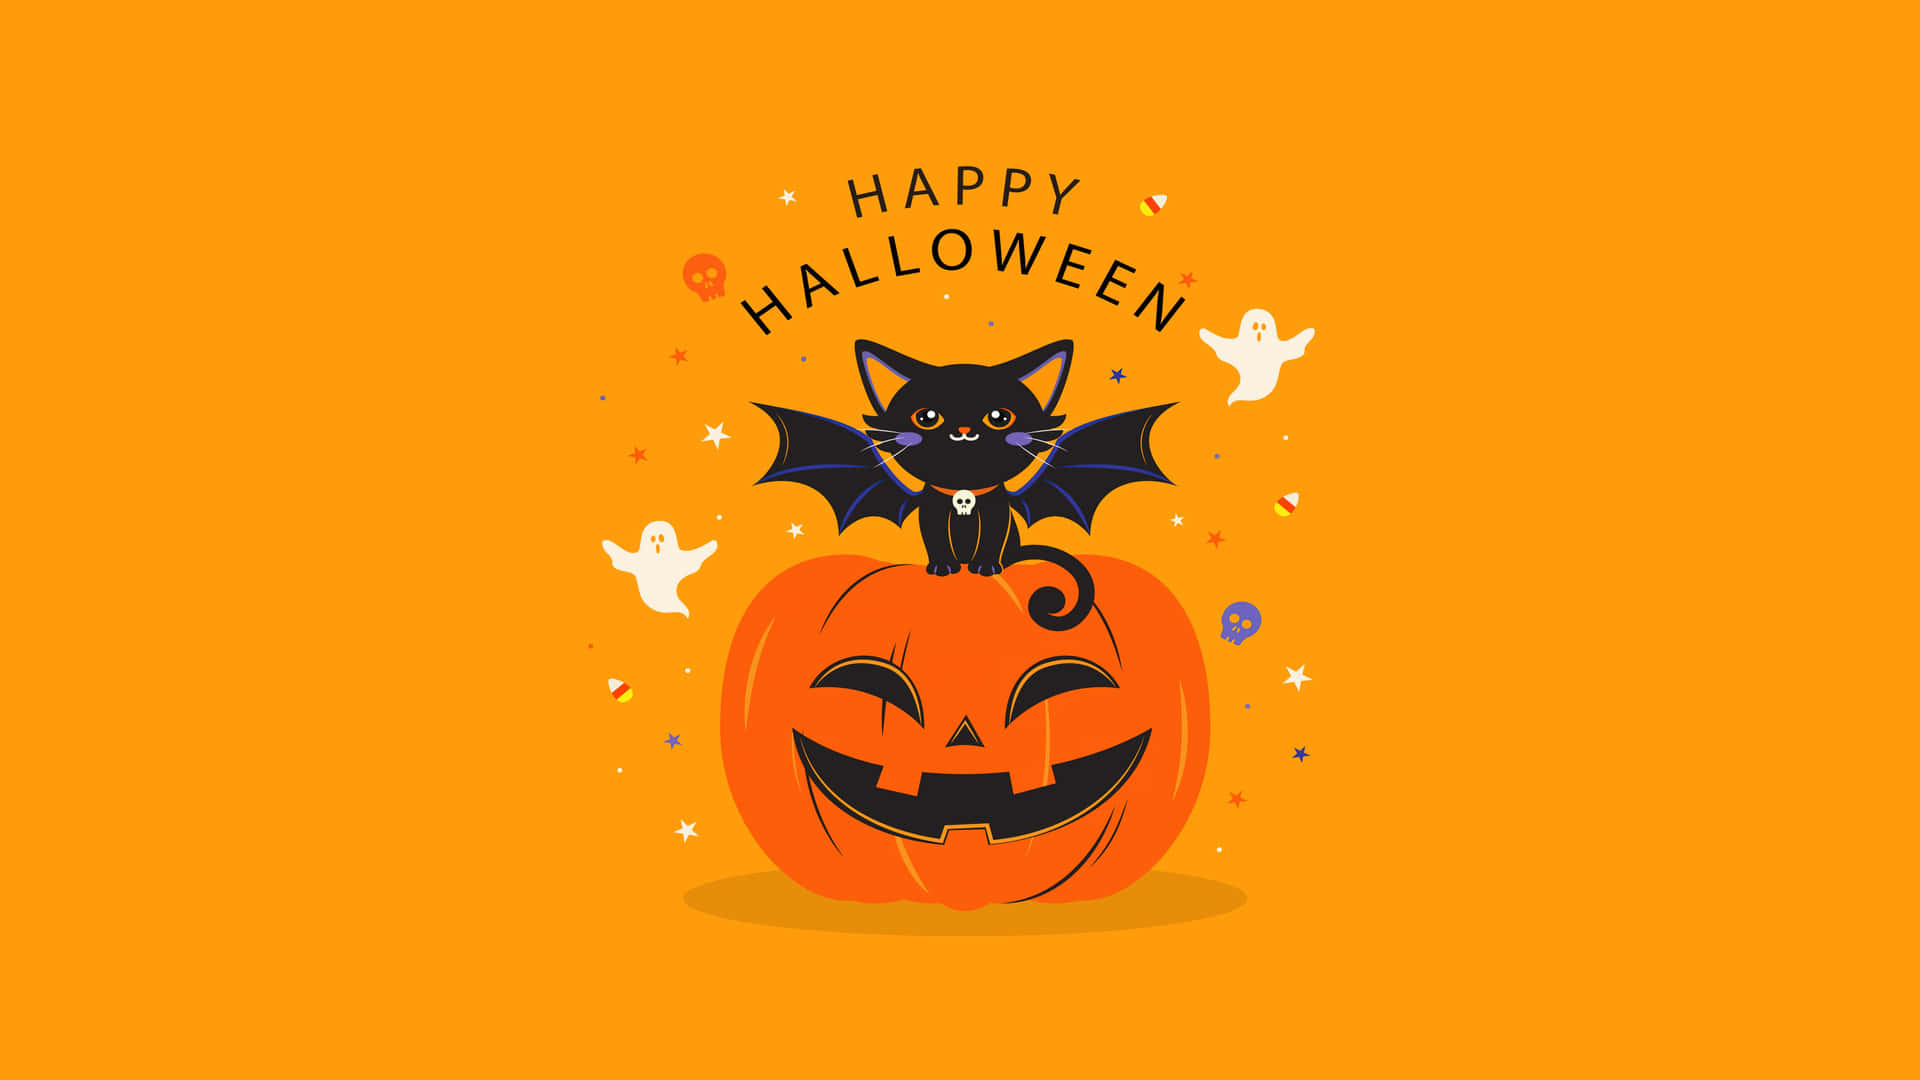 Trick-or-Treat, Spooky Cat in Costume Ready for Halloween Wallpaper